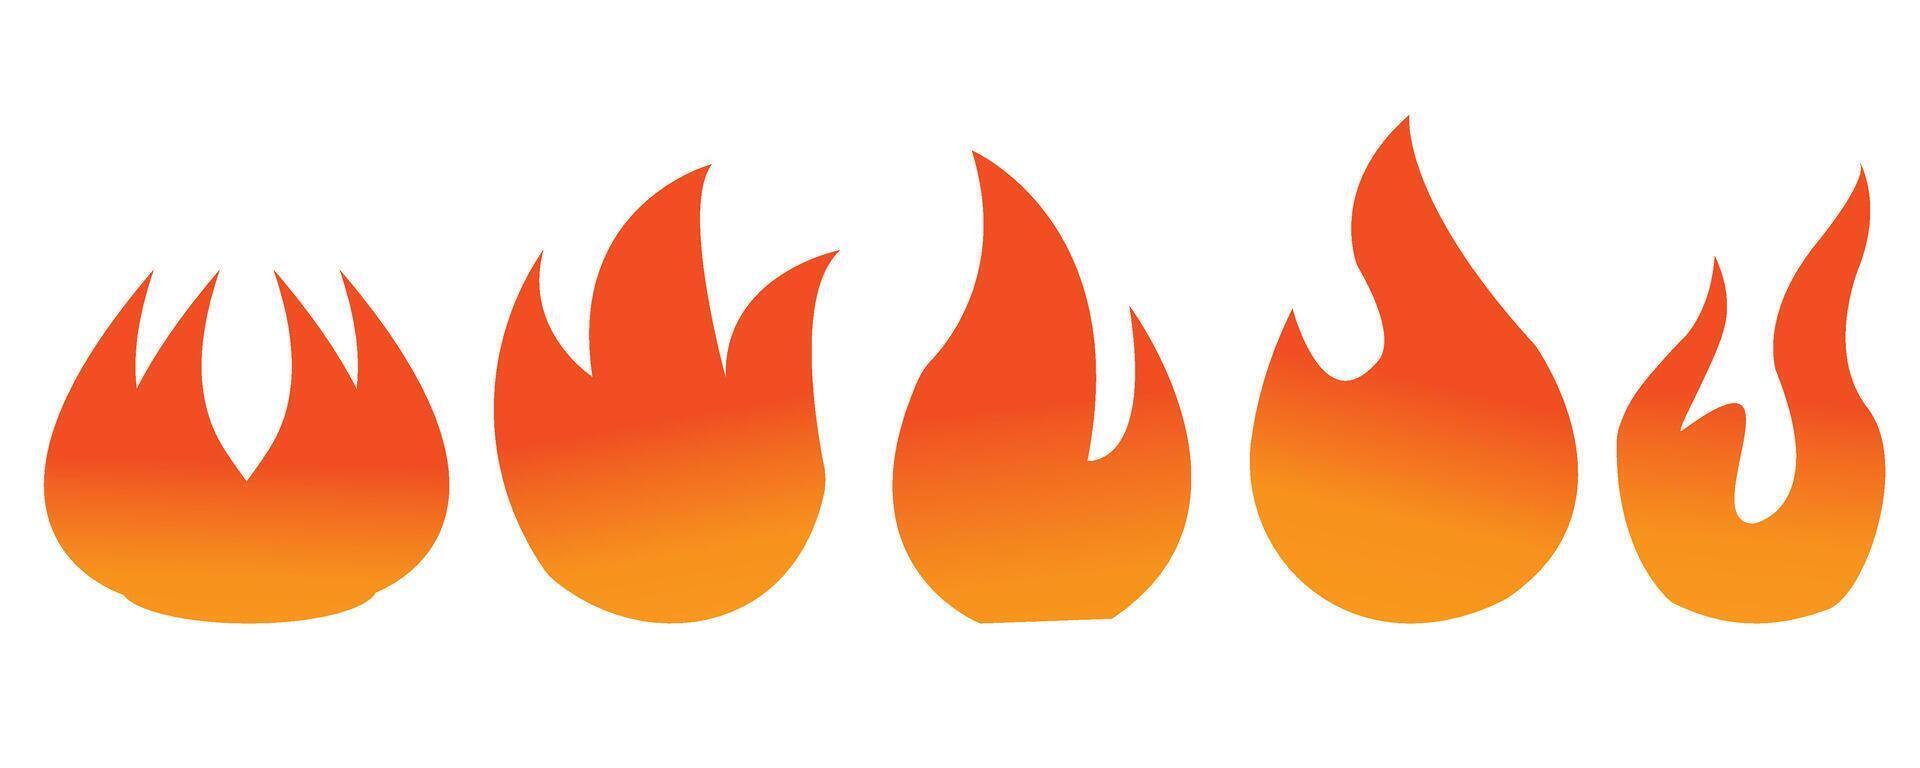 Fire icon collection. Fire flame logo design. Fire flame icon. Fire symbols. vector